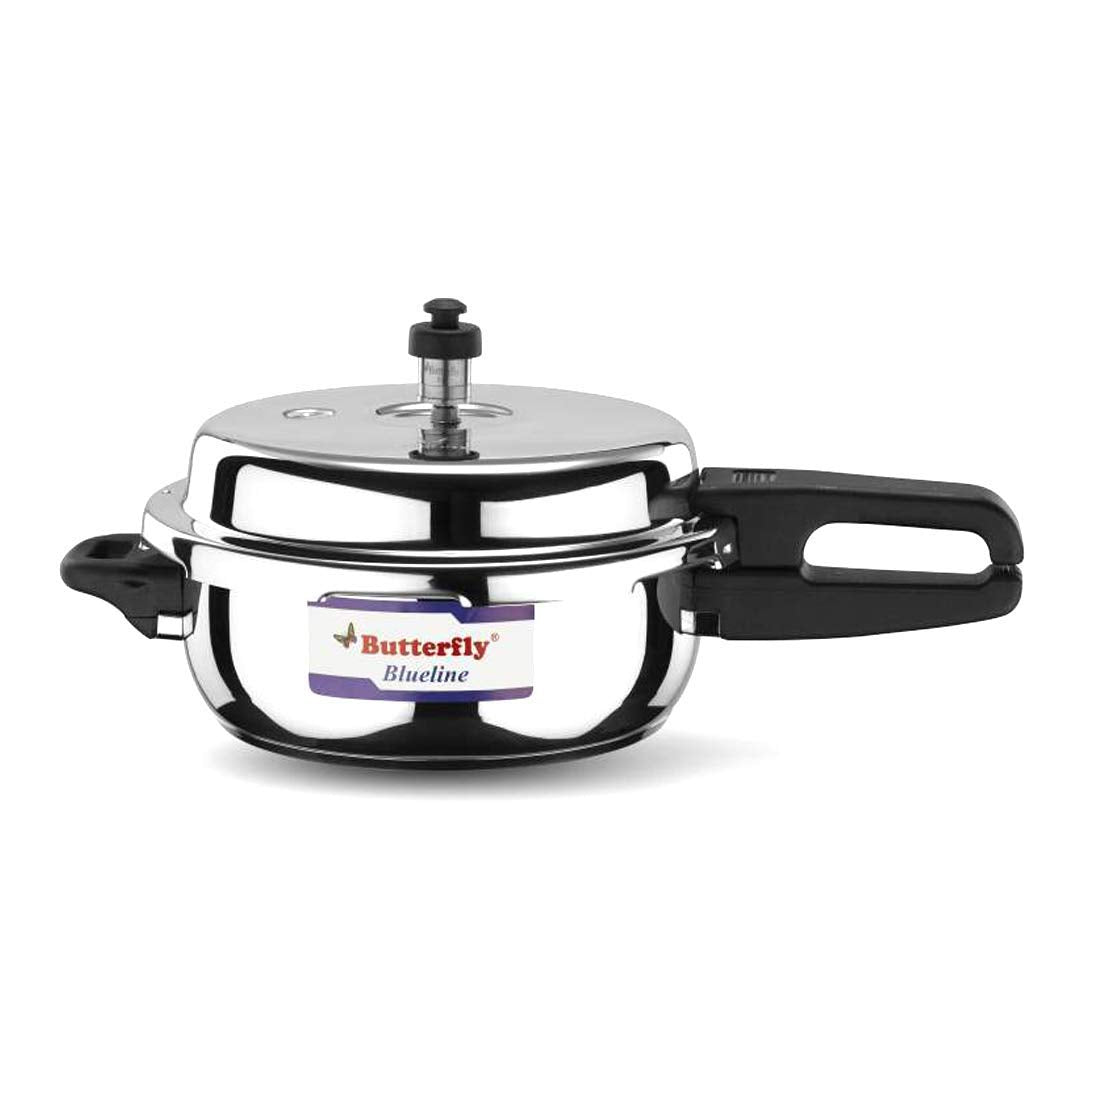 Butterfly Blueline Stainless Steel Pressure Cooker | Outer Lid | Induction Base